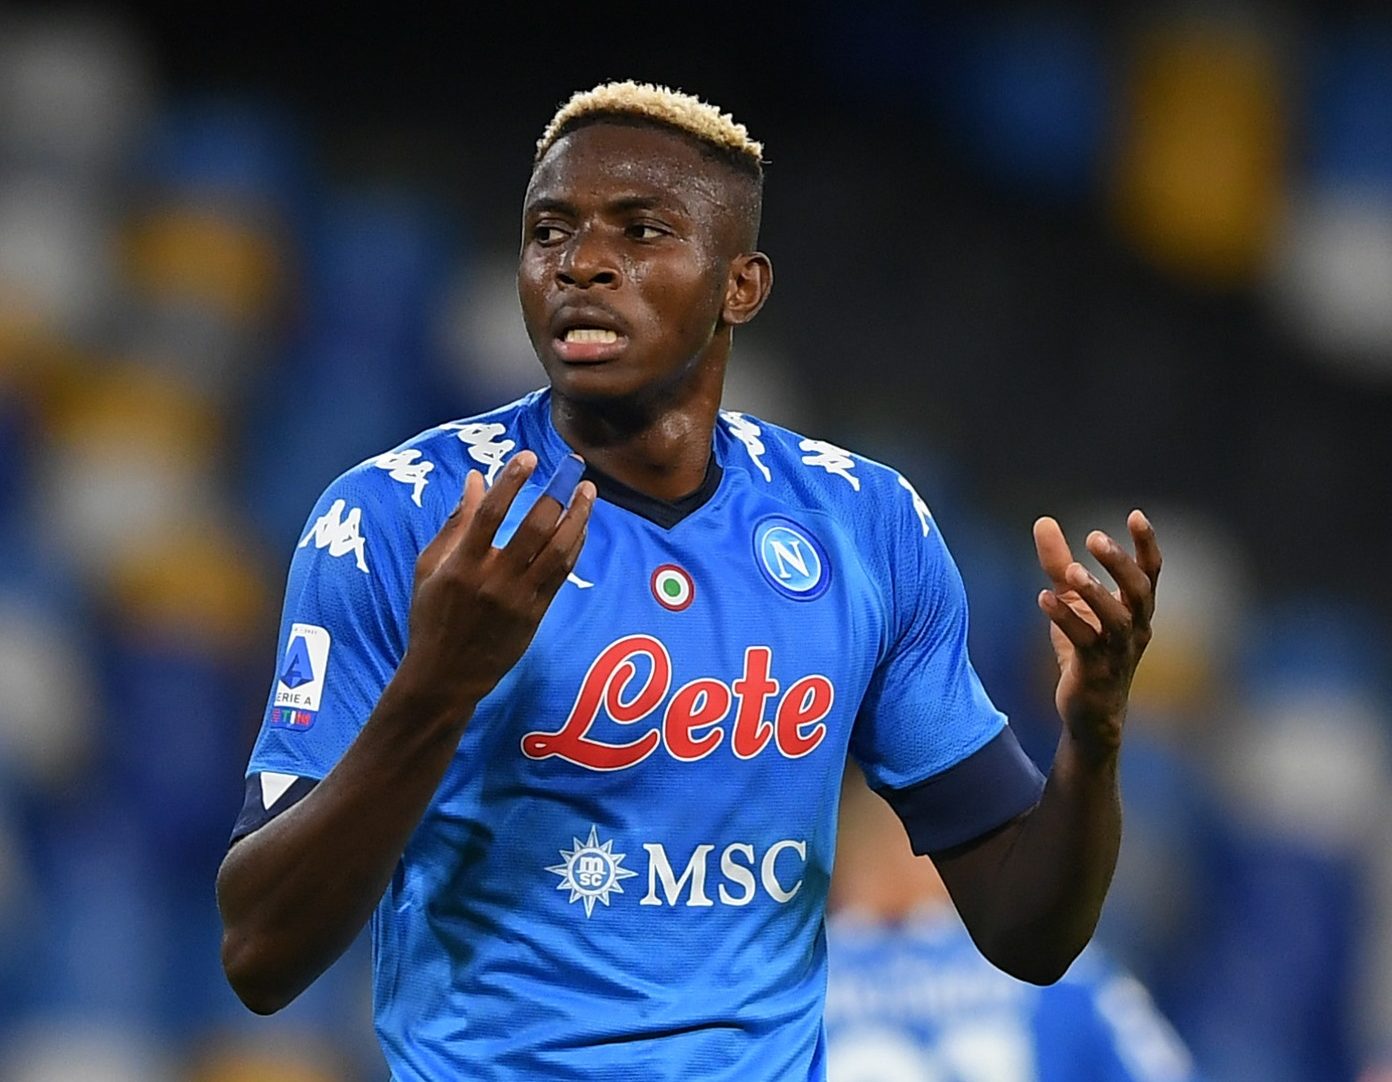 Serie A: Osimhen, Lookman resume battle for top scorer’s gong in Italy